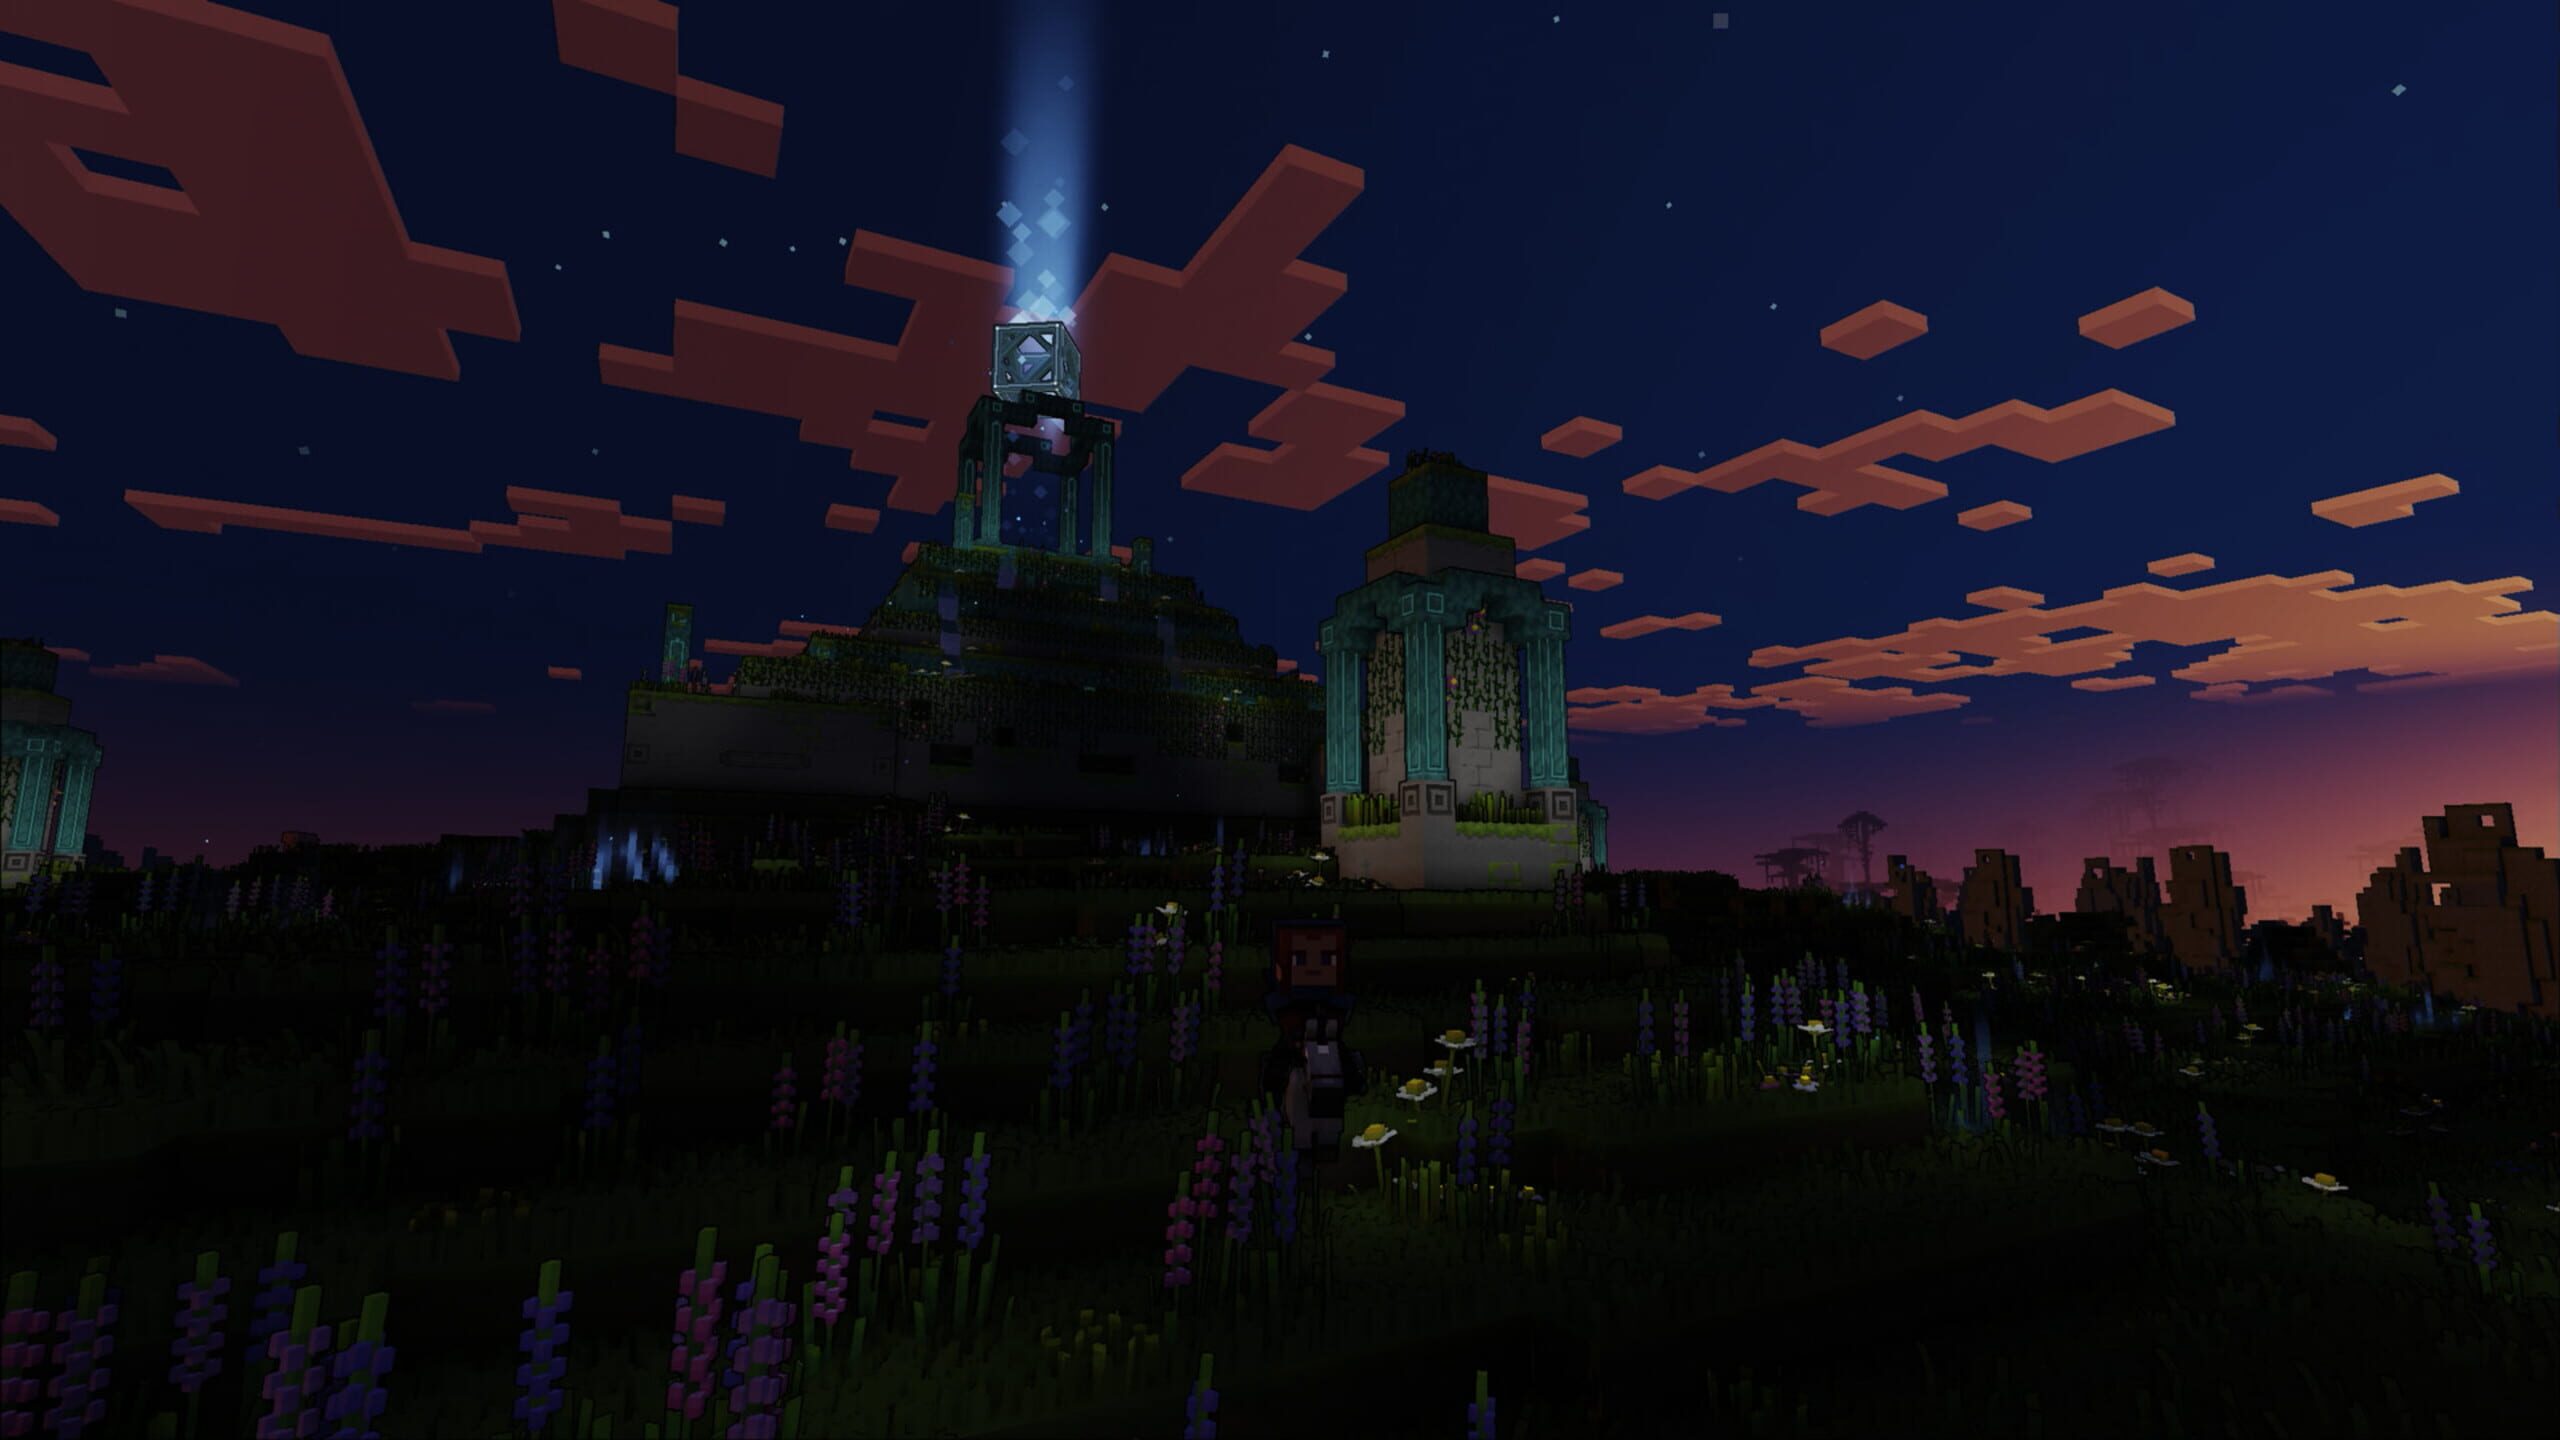 Is Minecraft Legends Down? Check Server Status and Outages : r